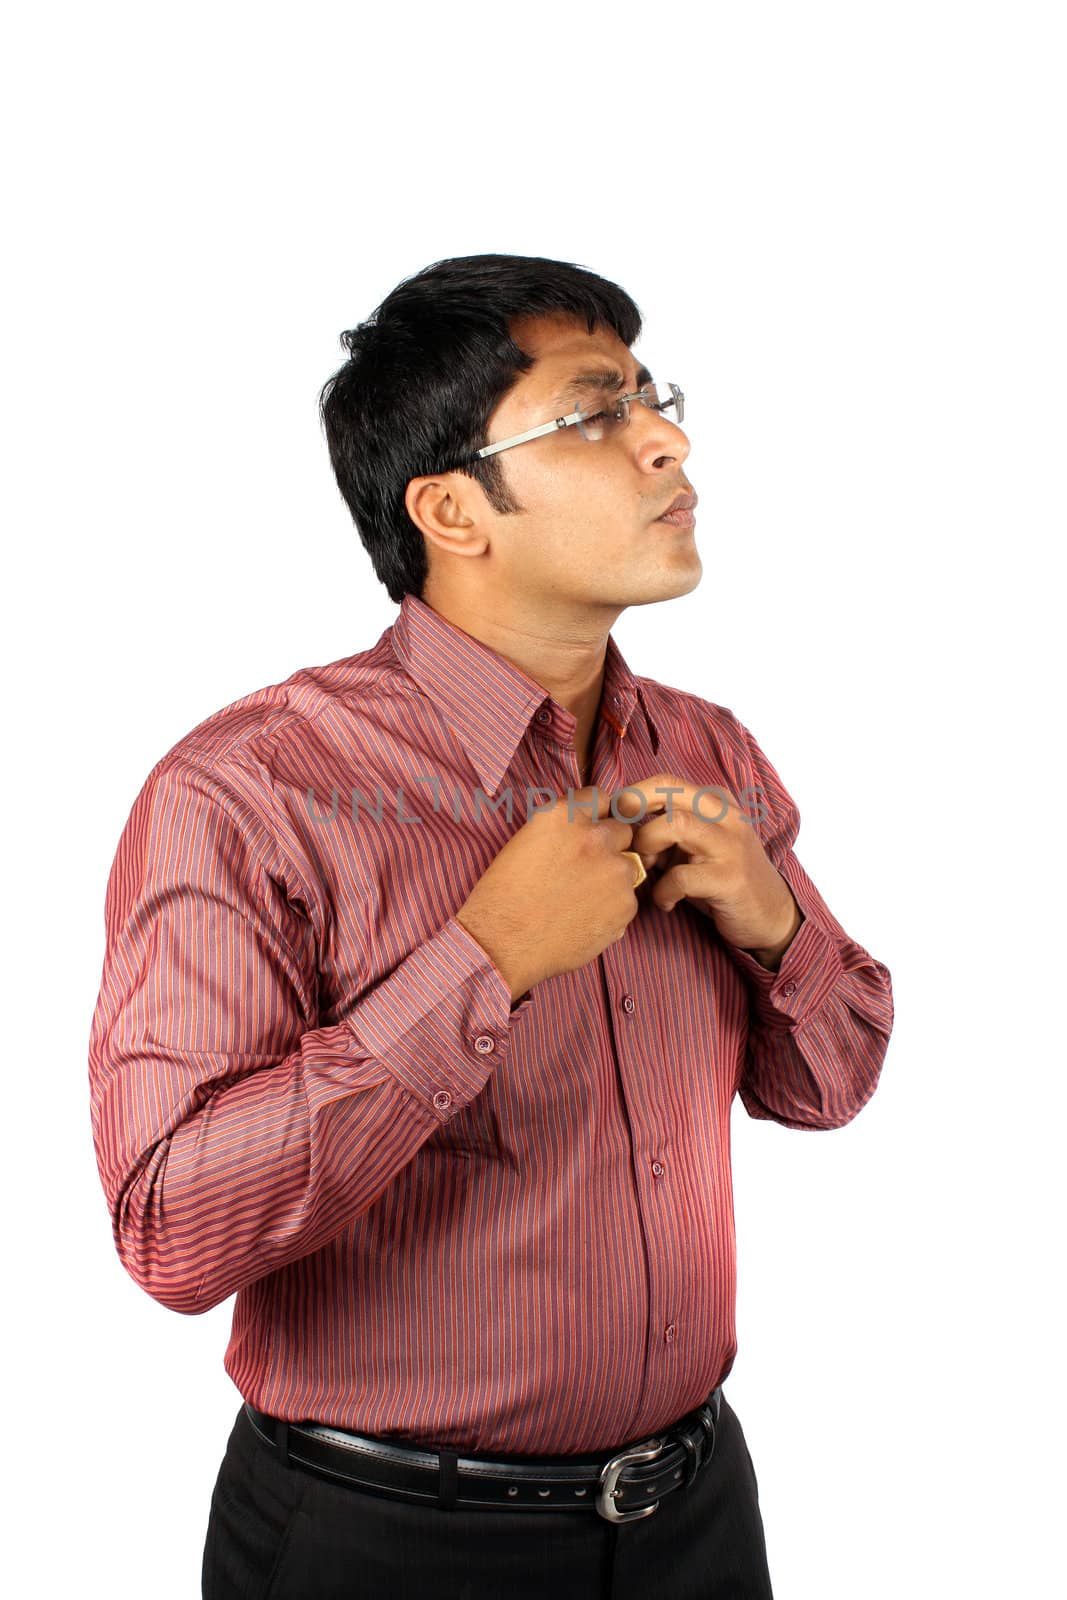 An Indian businessman getting prepared for his office wearing a striped shirt, on white studio background.